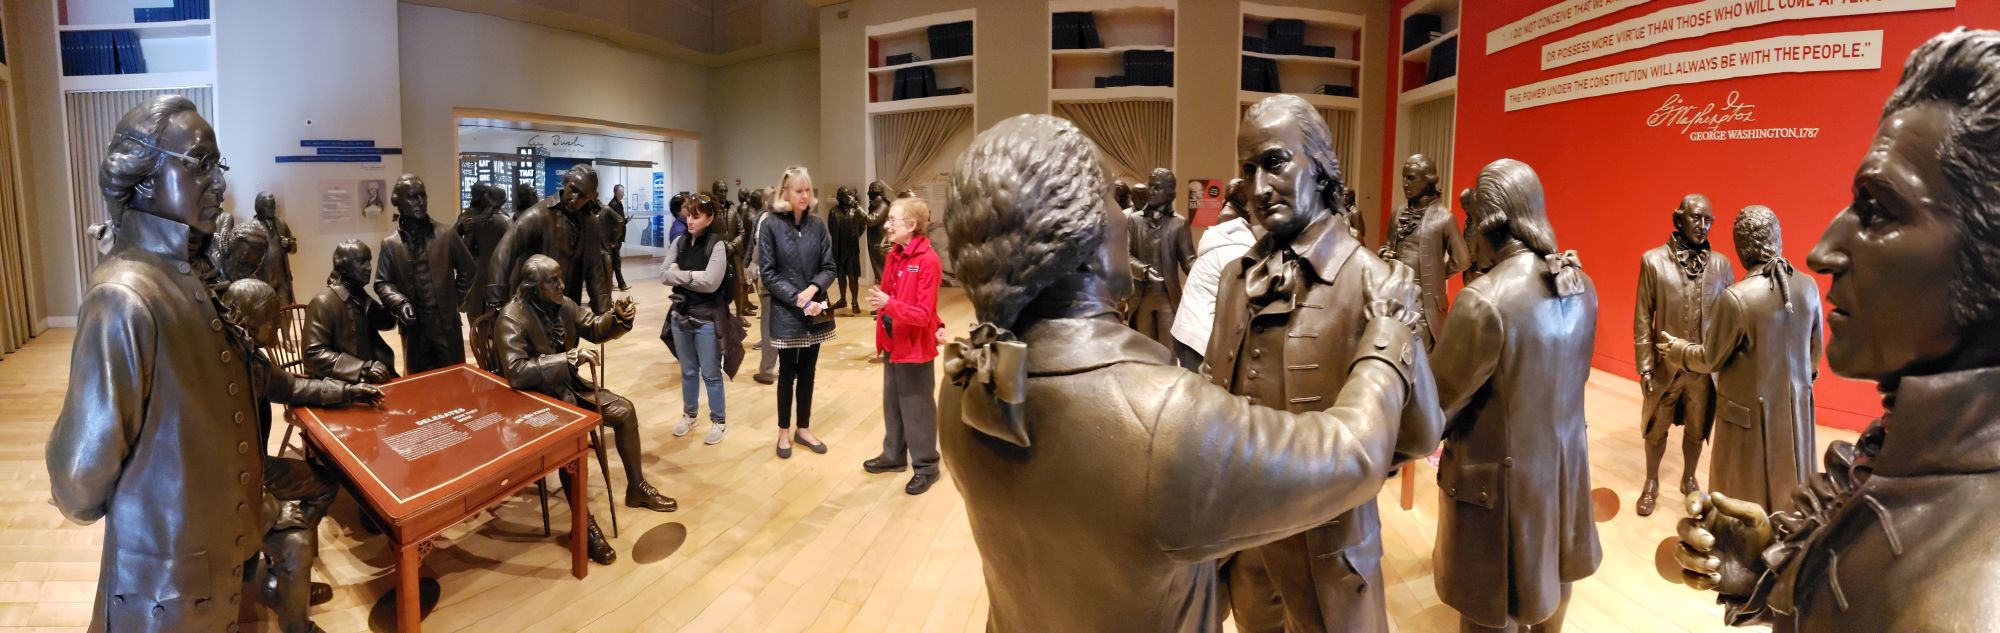 Visitors can walk among lifesize statues of the men who attended the Constitutional Convention at the National Center for the Constitution. Photo: Edwin Grosvenor.